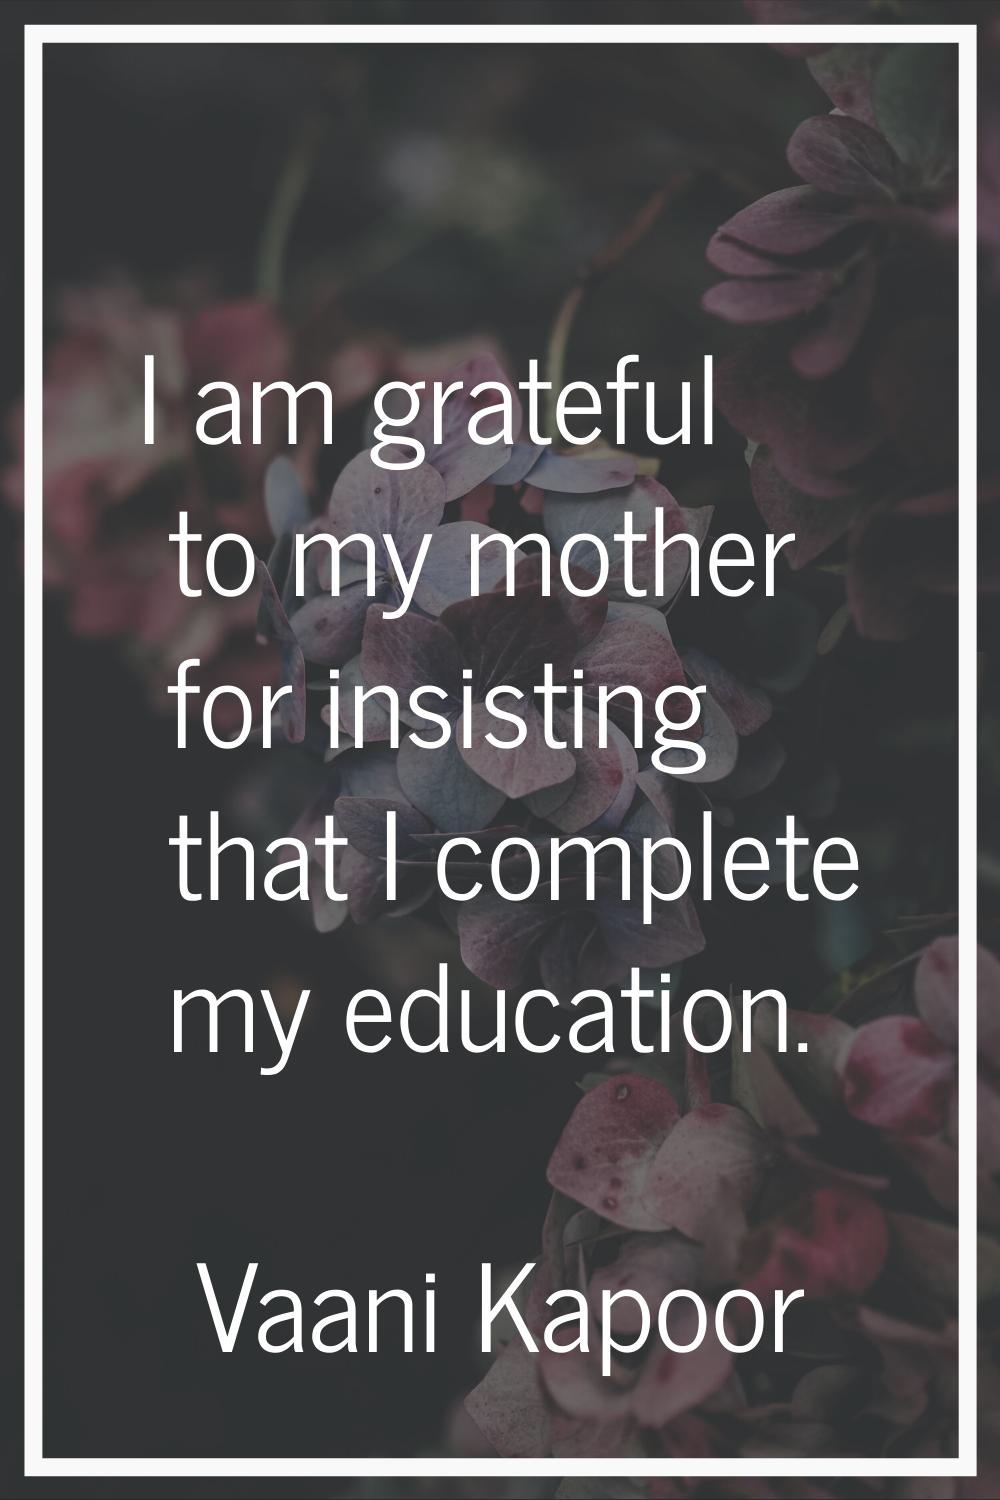 I am grateful to my mother for insisting that I complete my education.